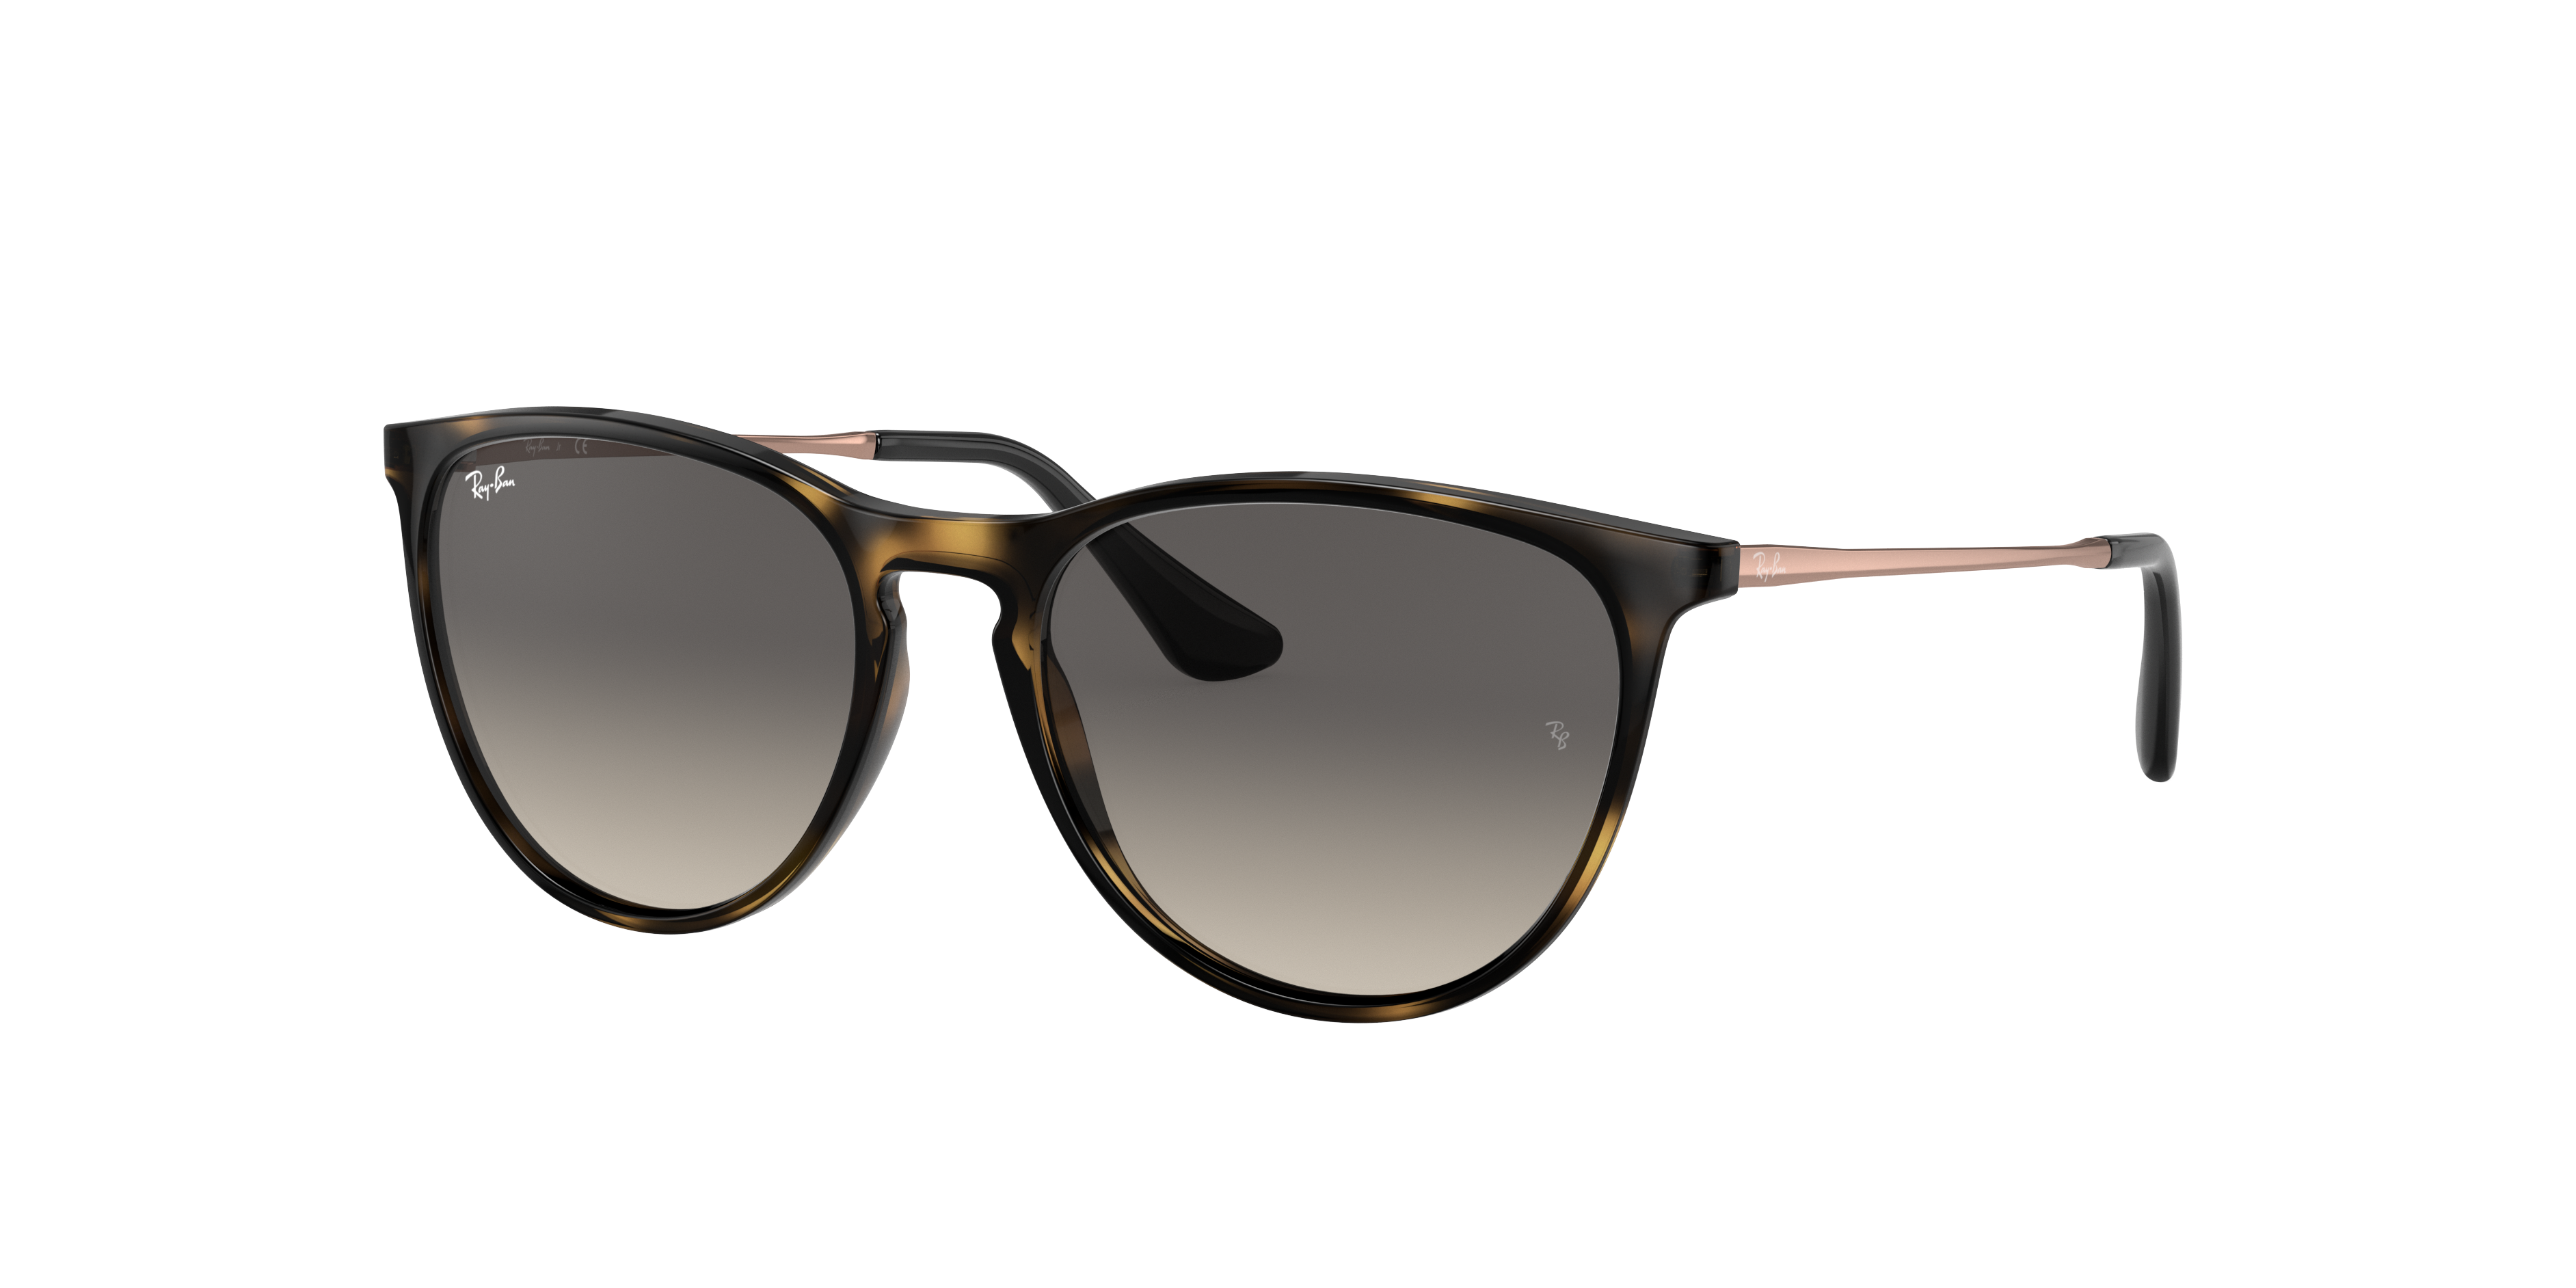 Expressly Feast Civic Erika Kids Sunglasses in Havana and Grey | Ray-Ban®